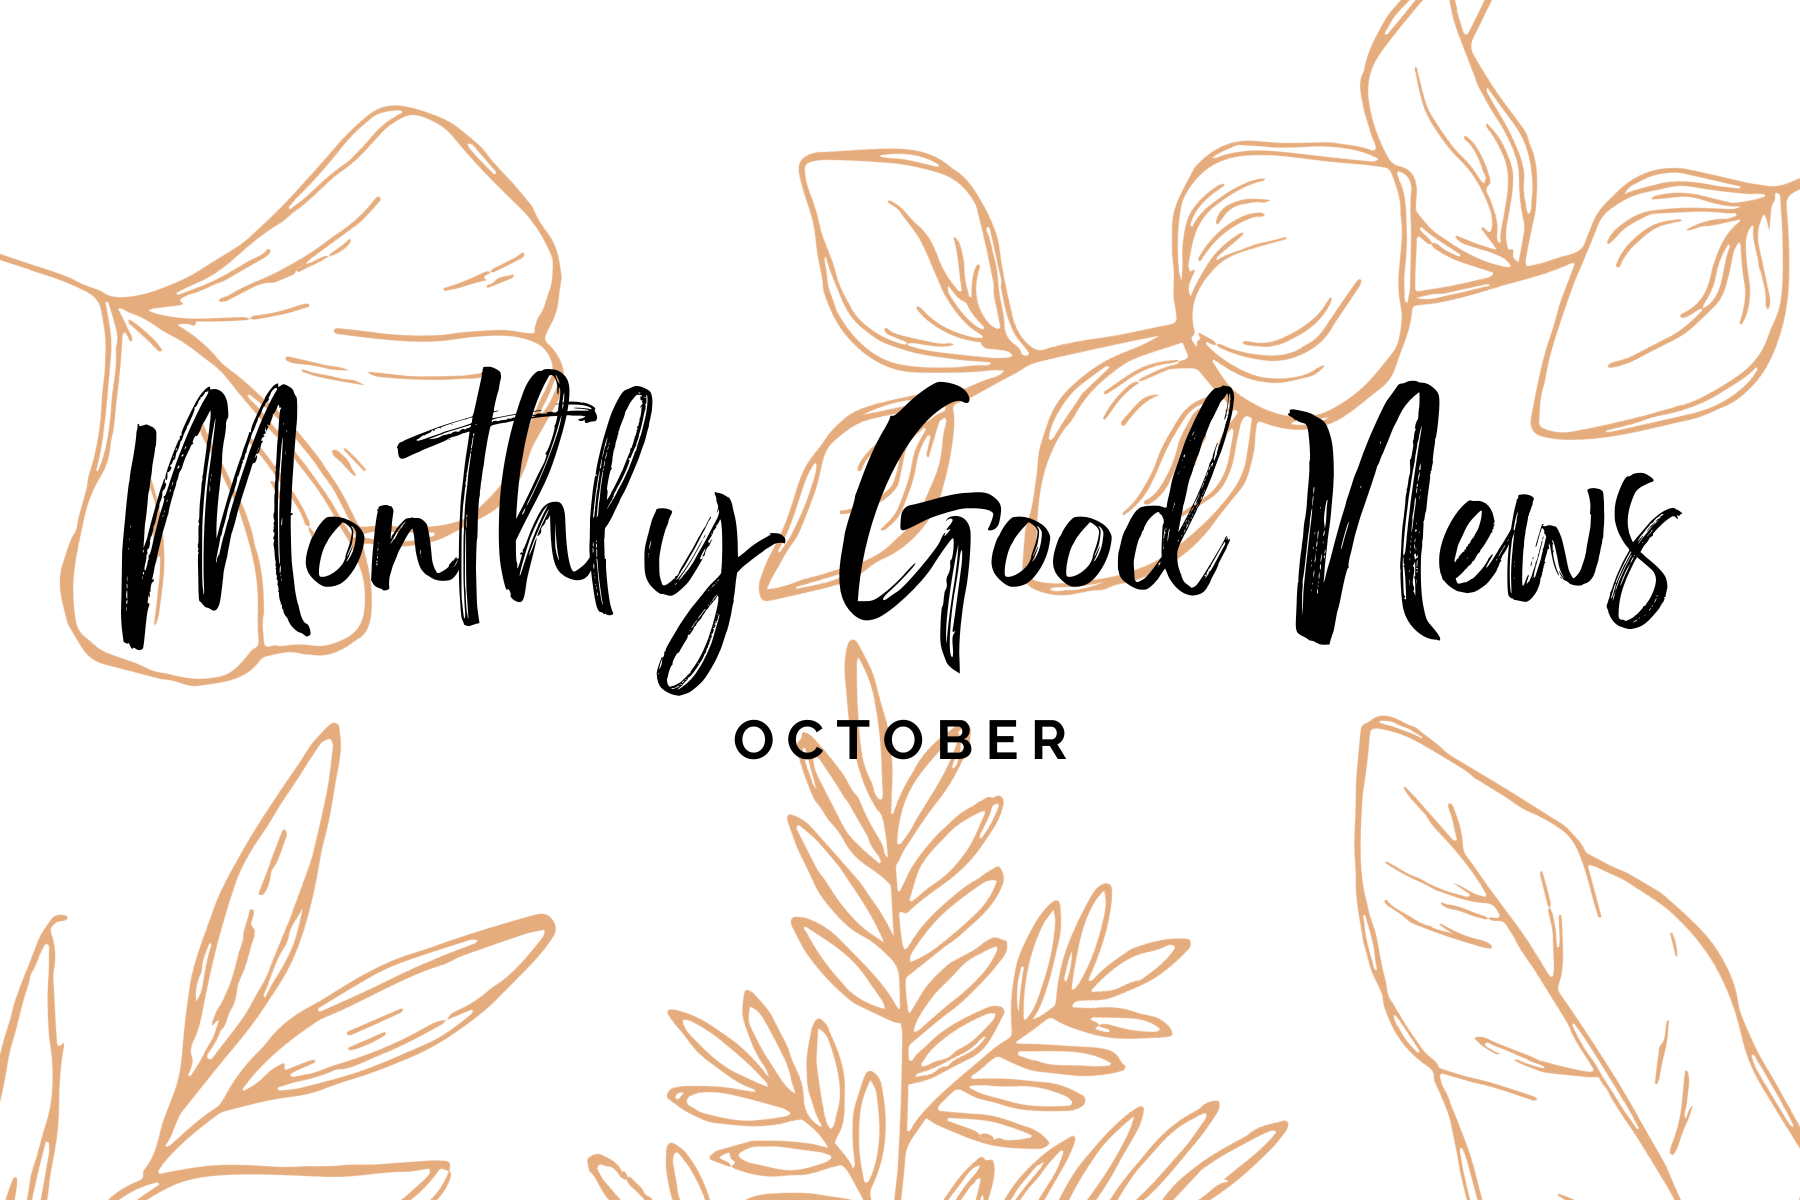 Monthly Good News #14: October